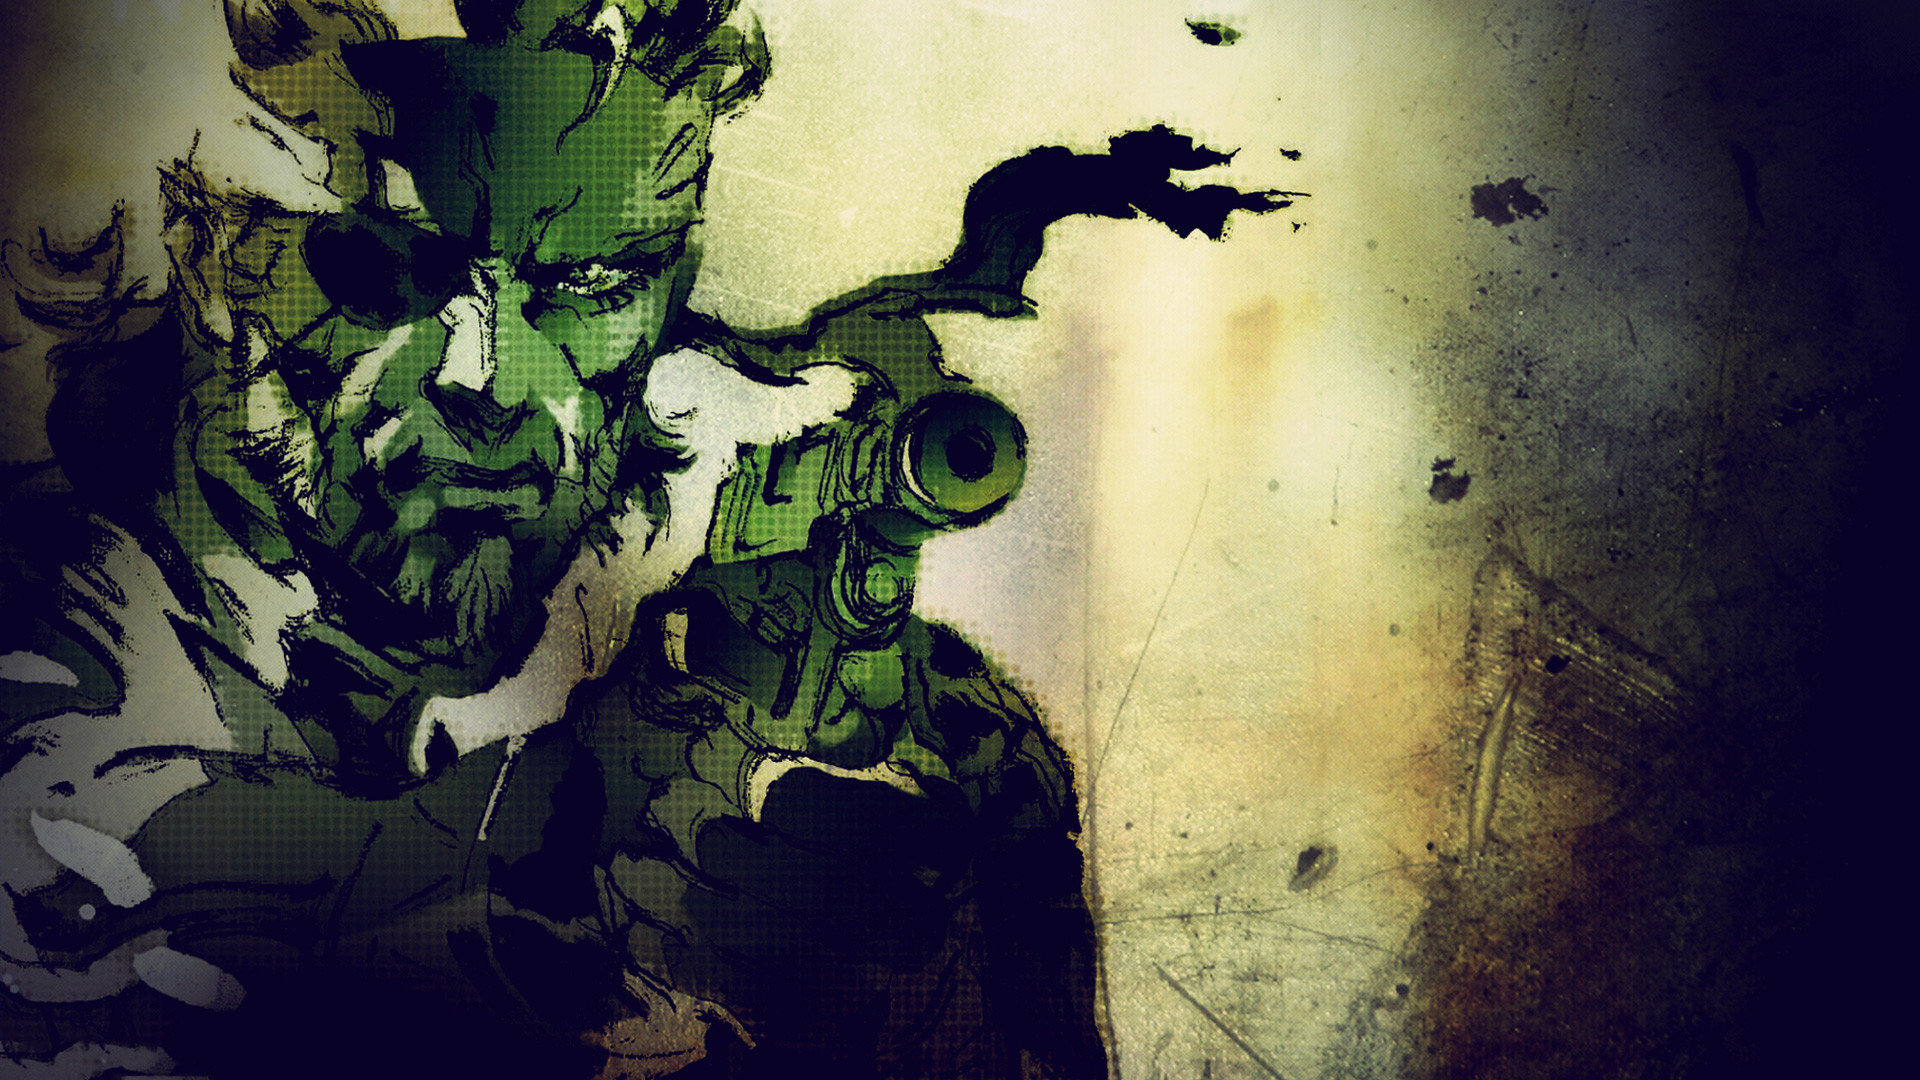 1920x1080 Metal Gear Solid - Snake HD Wallpaper | Background Image |  |  ID:500625 - Wallpaper Abyss